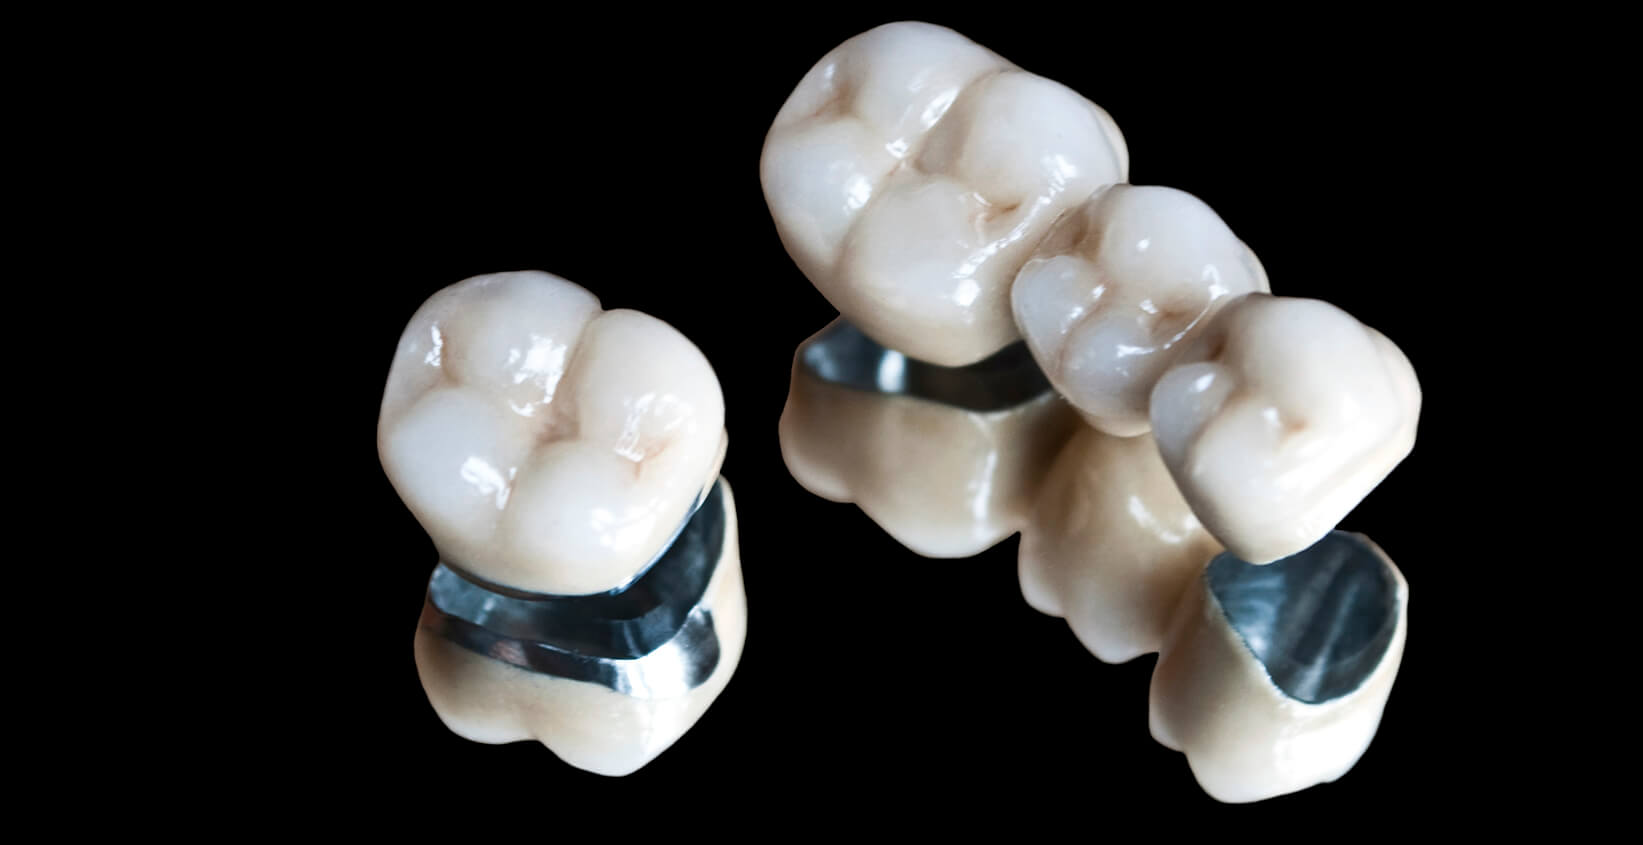 Restore the appearance and resilience of your teeth with Same-day Crowns